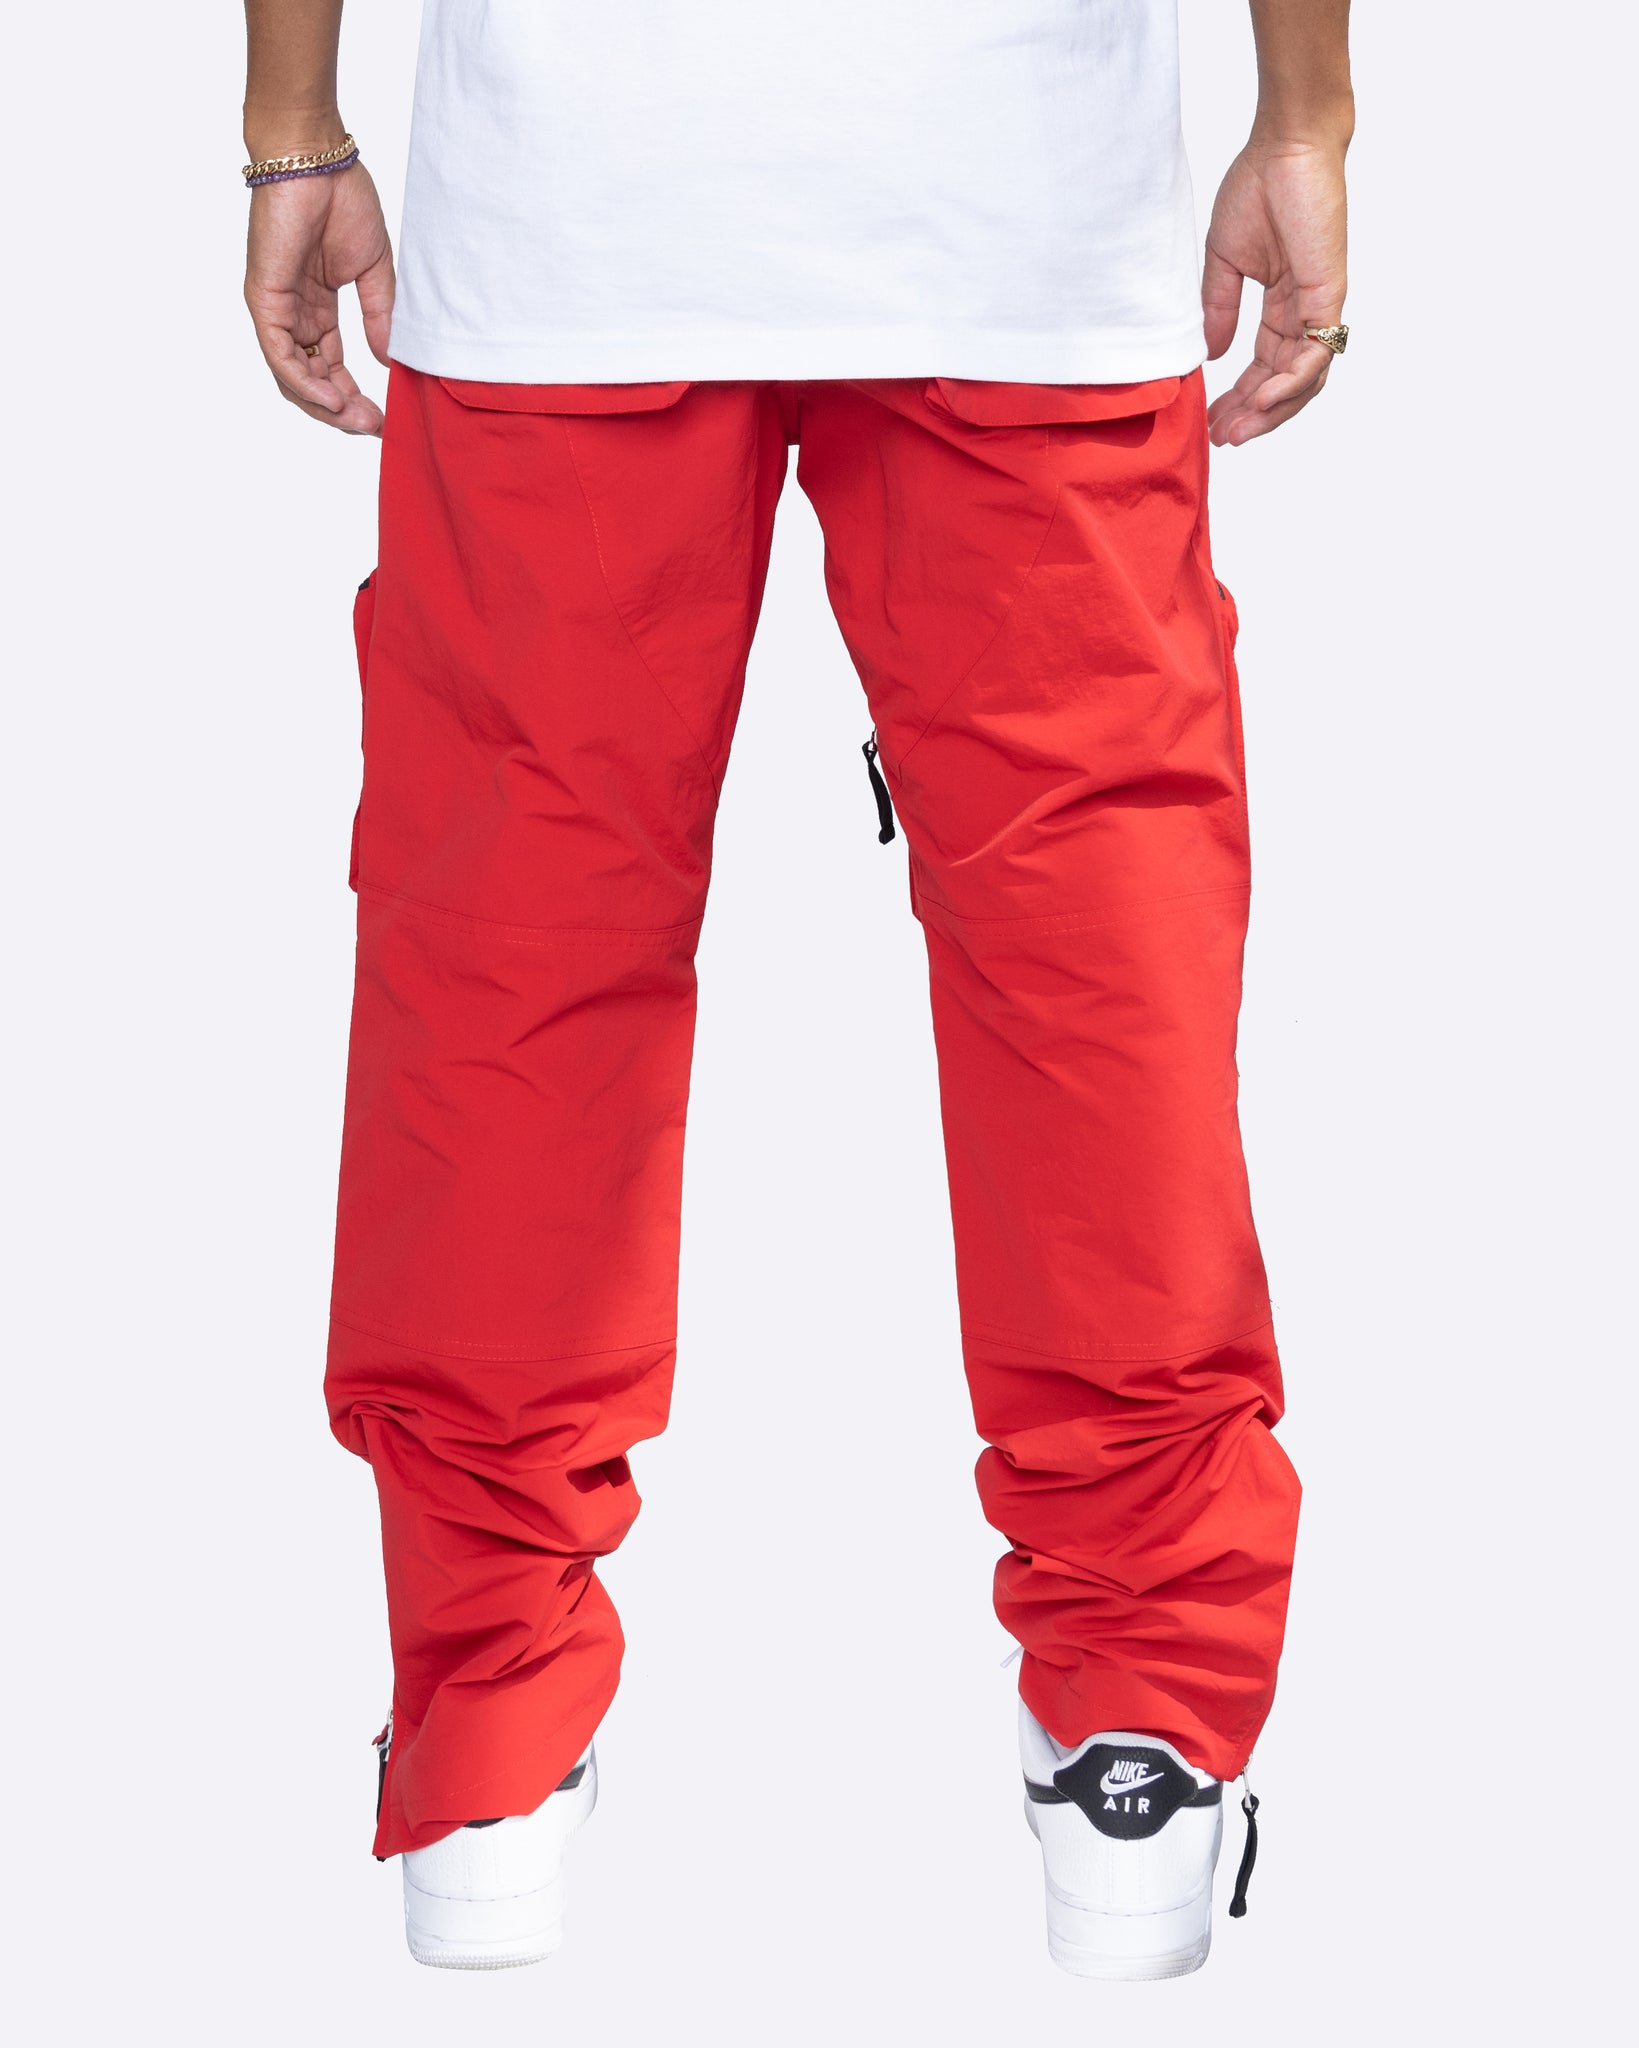 EPTM C4 CARGO PANTS-RED